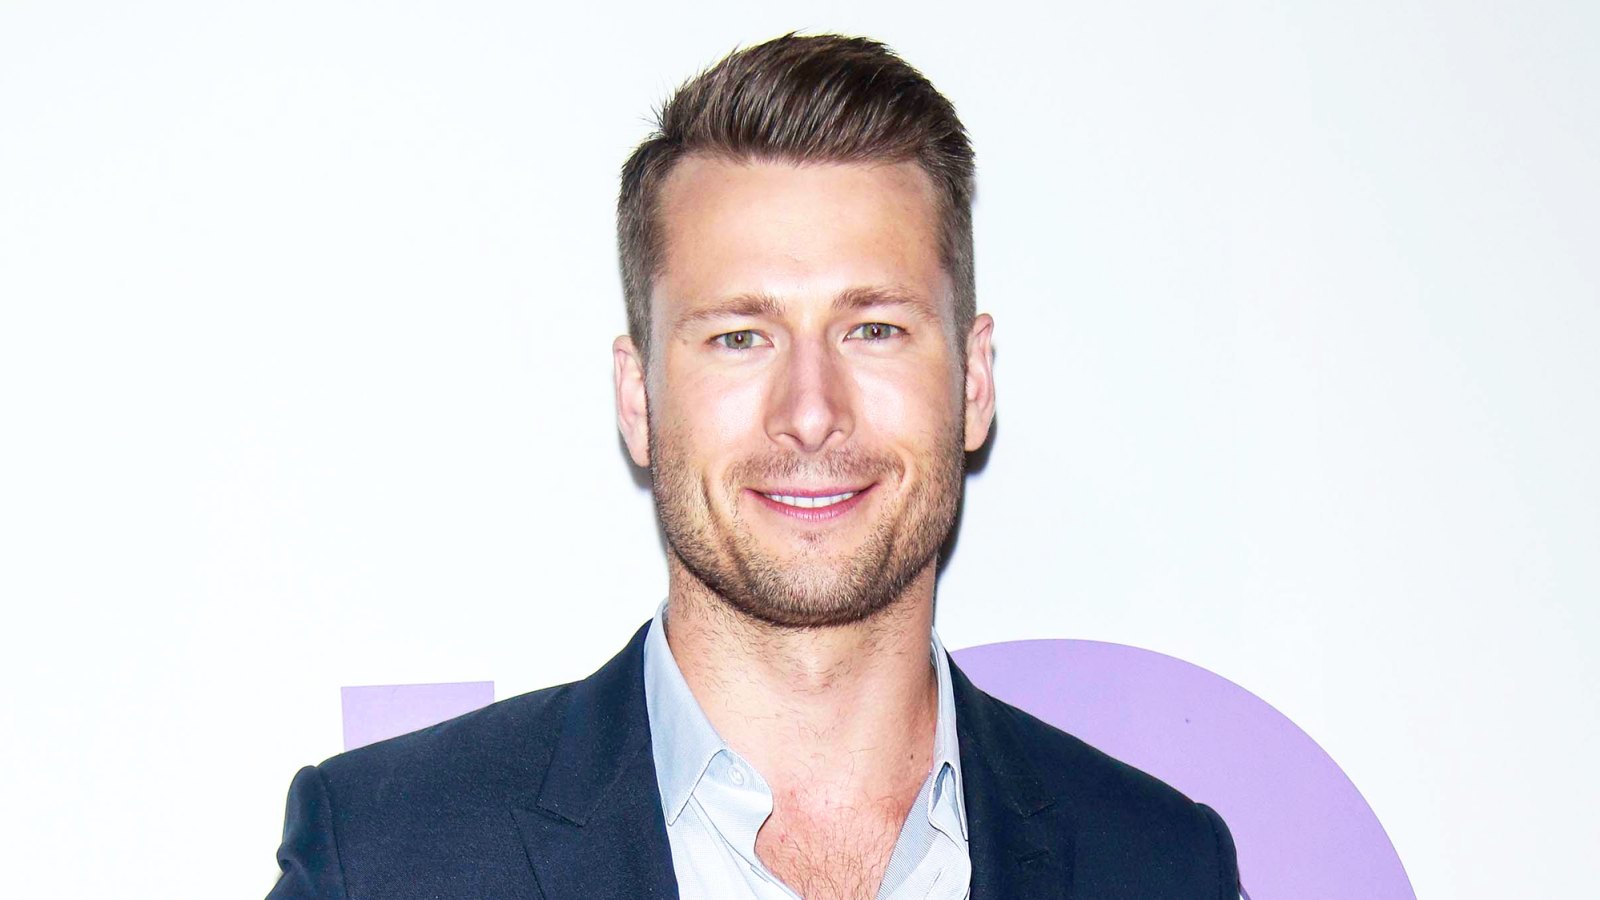 Glen Powell attends the 'Set It Up' New York screening at AMC Lincoln Square Theater on June 12, 2018 in New York City.